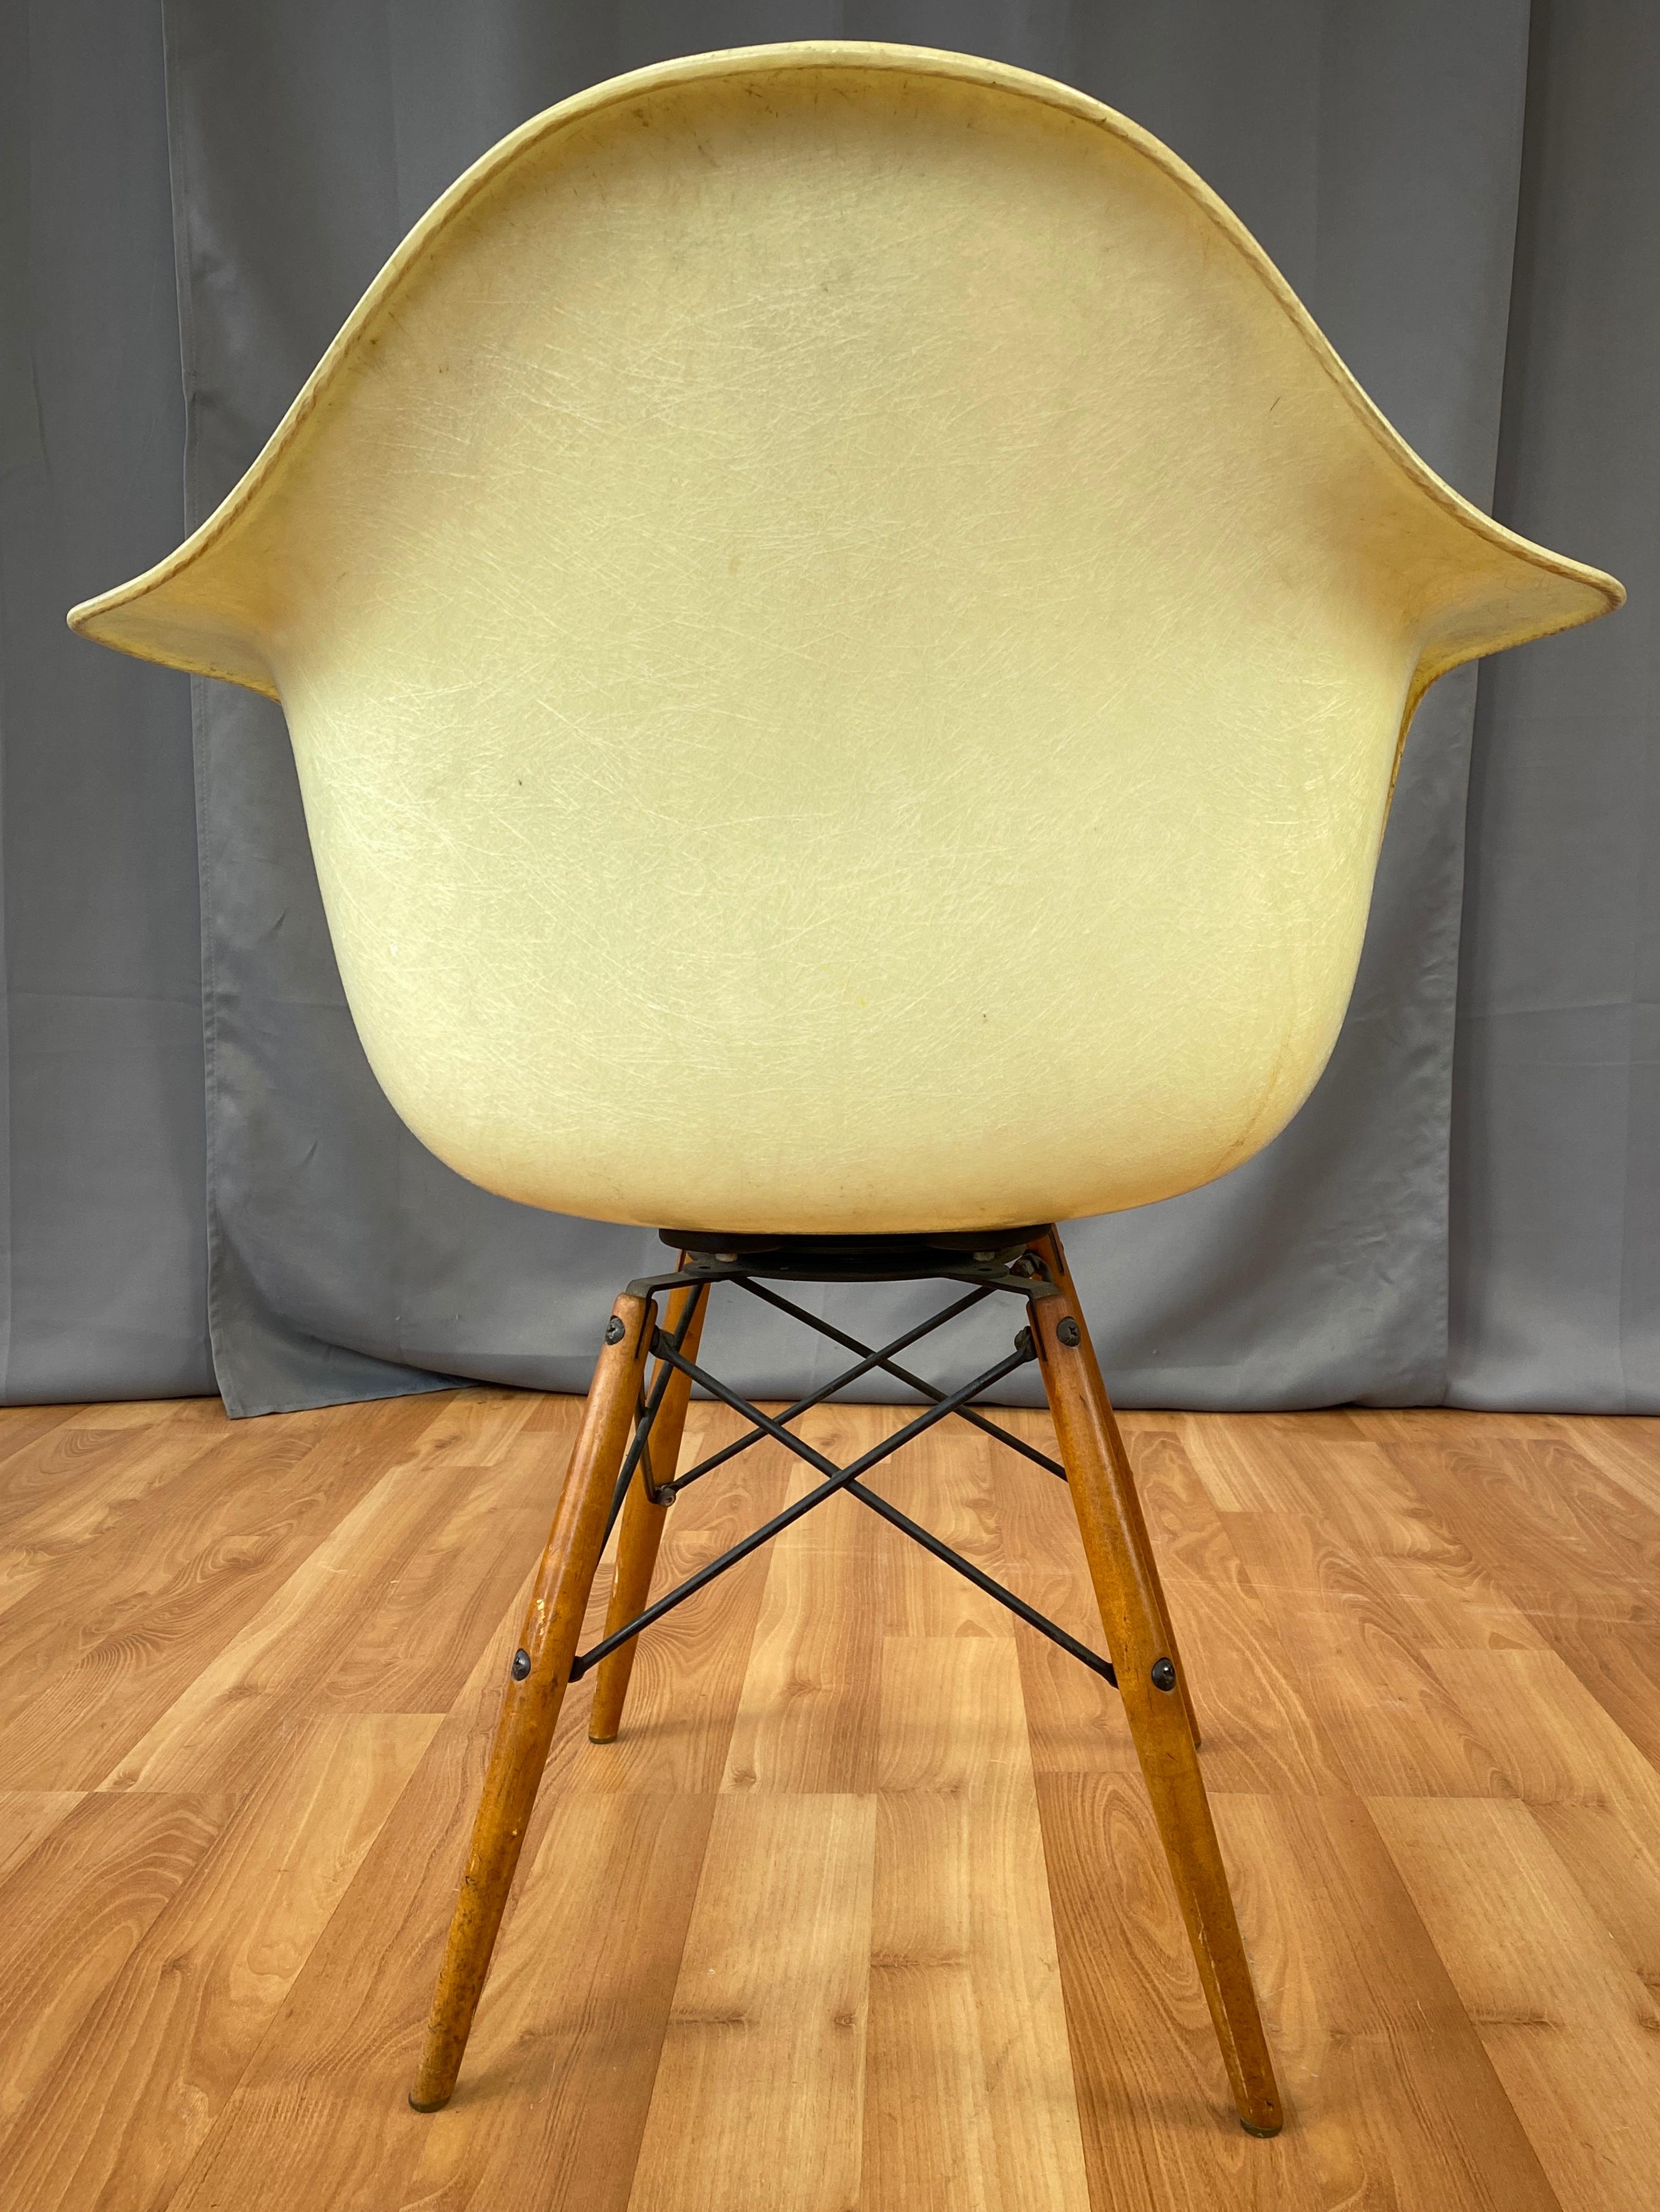 Mid-20th Century 1st Edition Zenith Plastics Rope Edge Paw Chair Charles Eames for Herman Miller